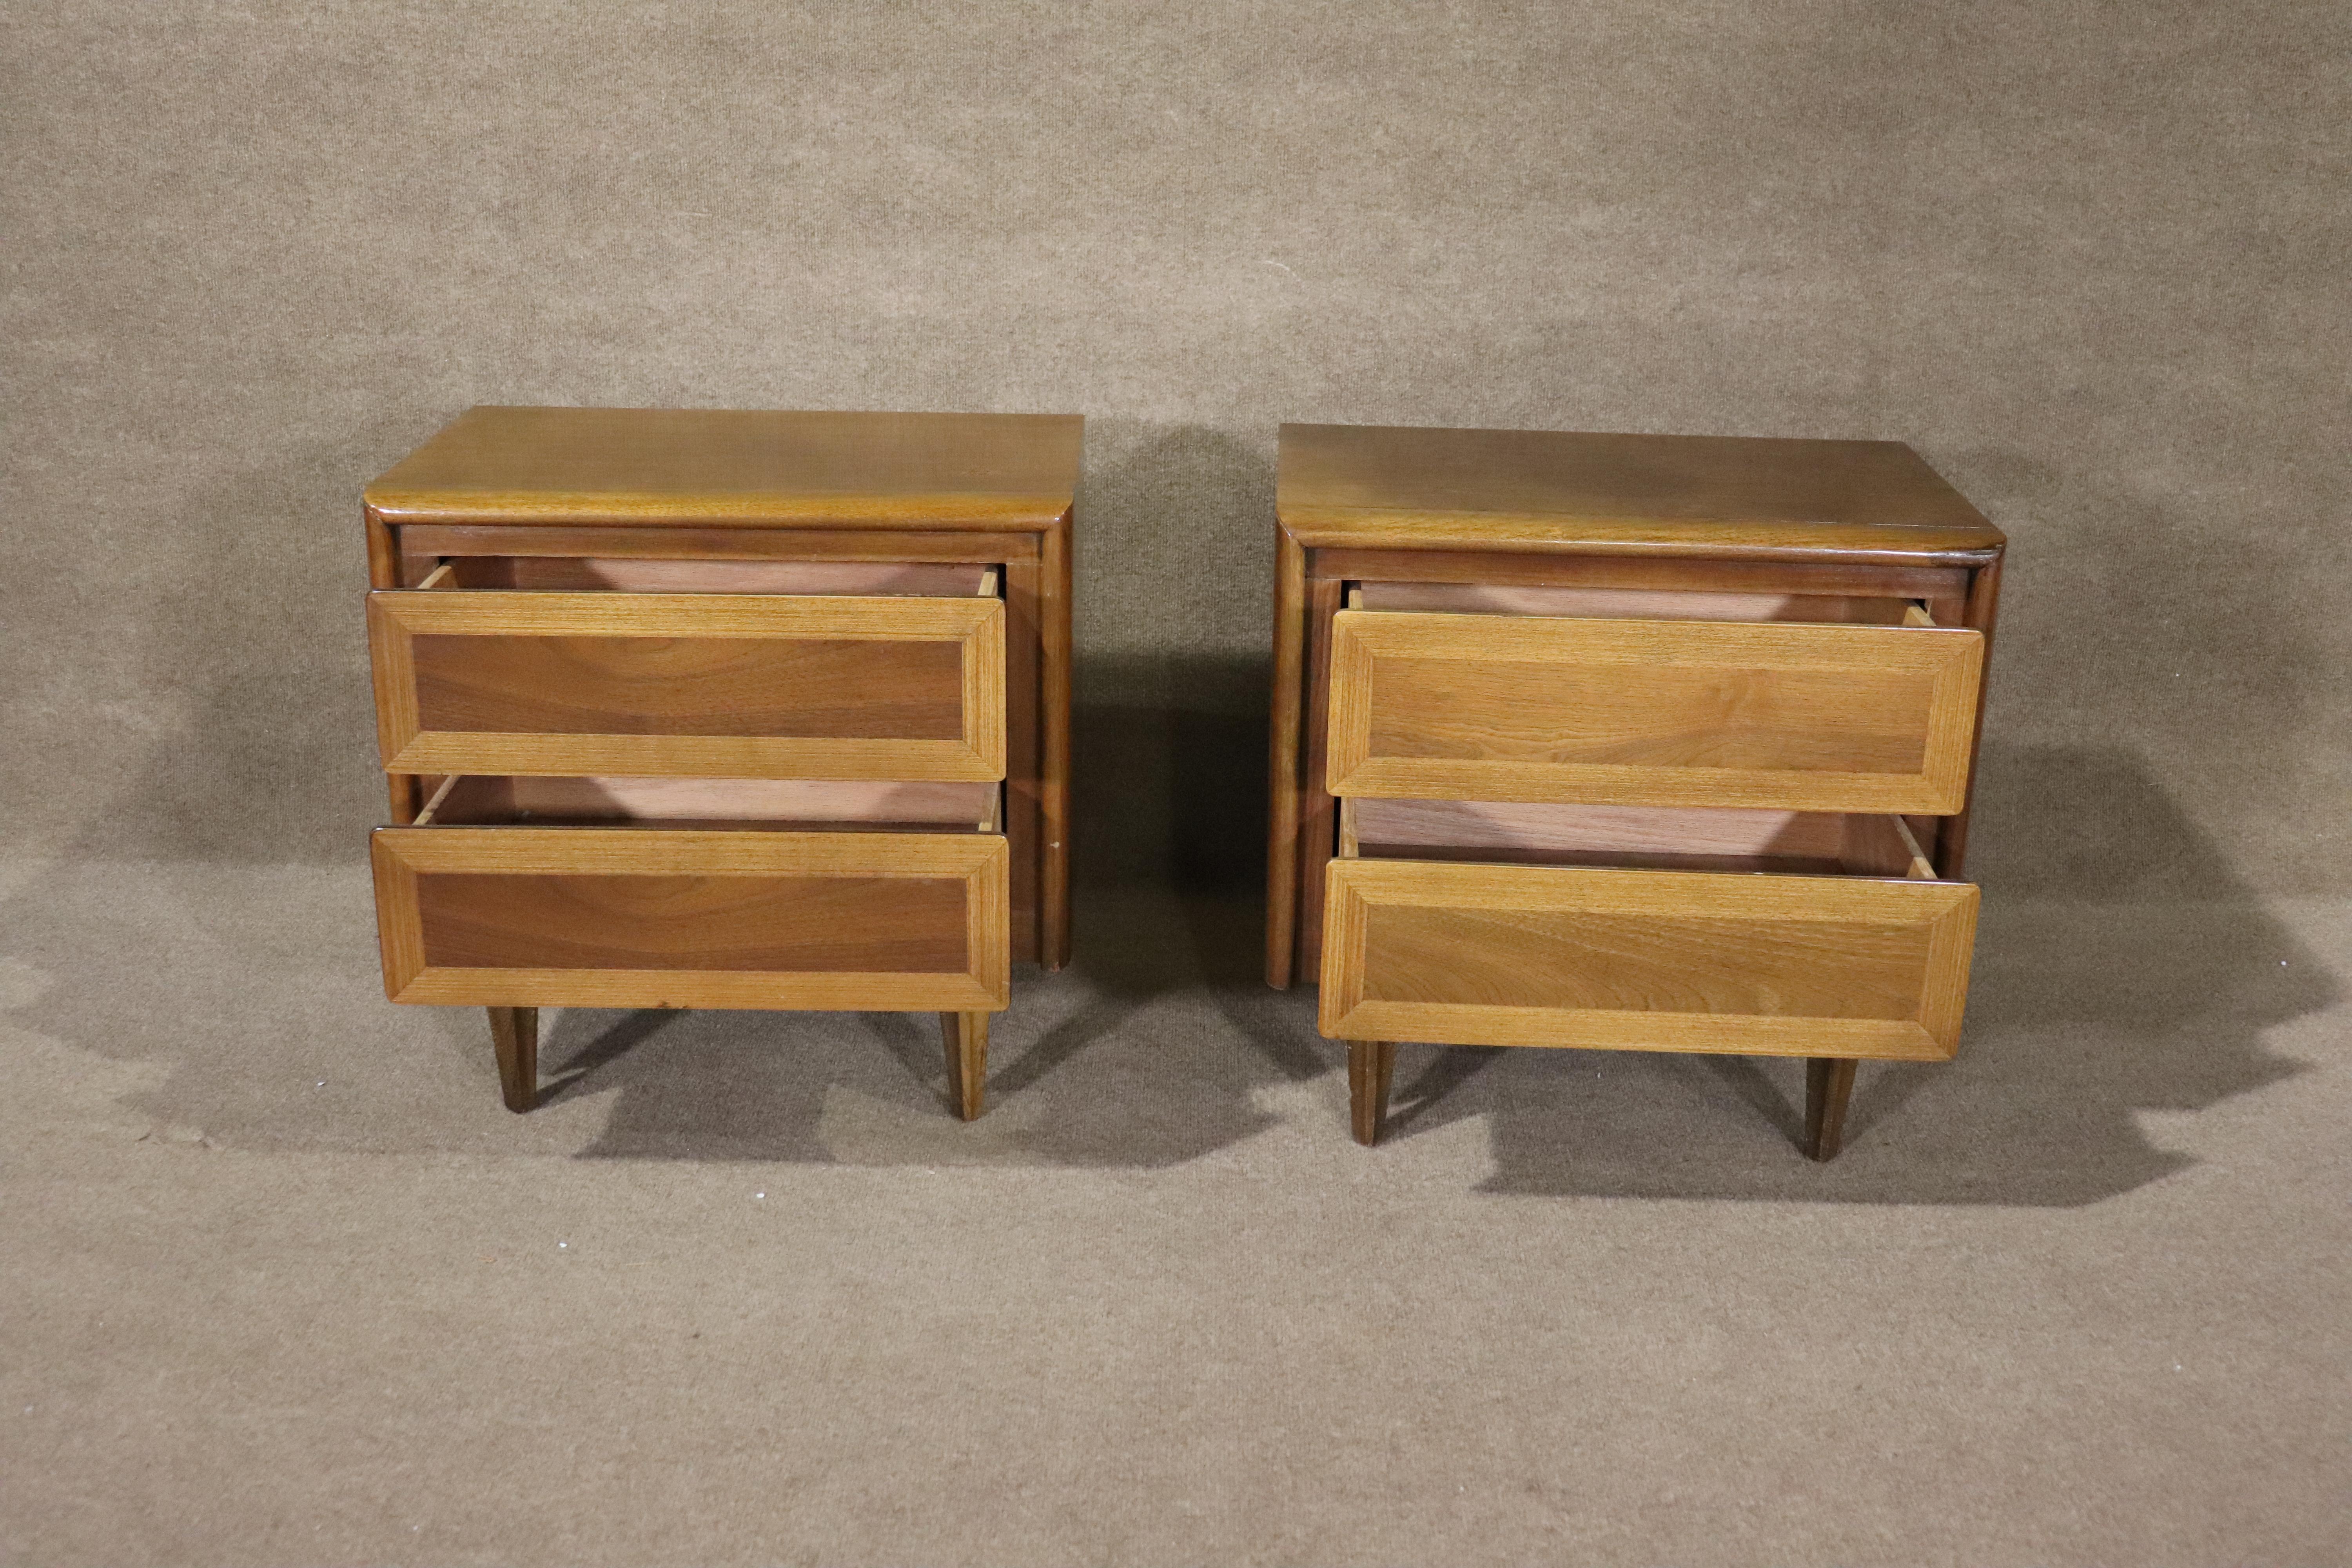 Pair of two drawer nightstands by American of Martinsville. Warm walnut grain with accepting oak trim.
Please confirm location NY or NJ